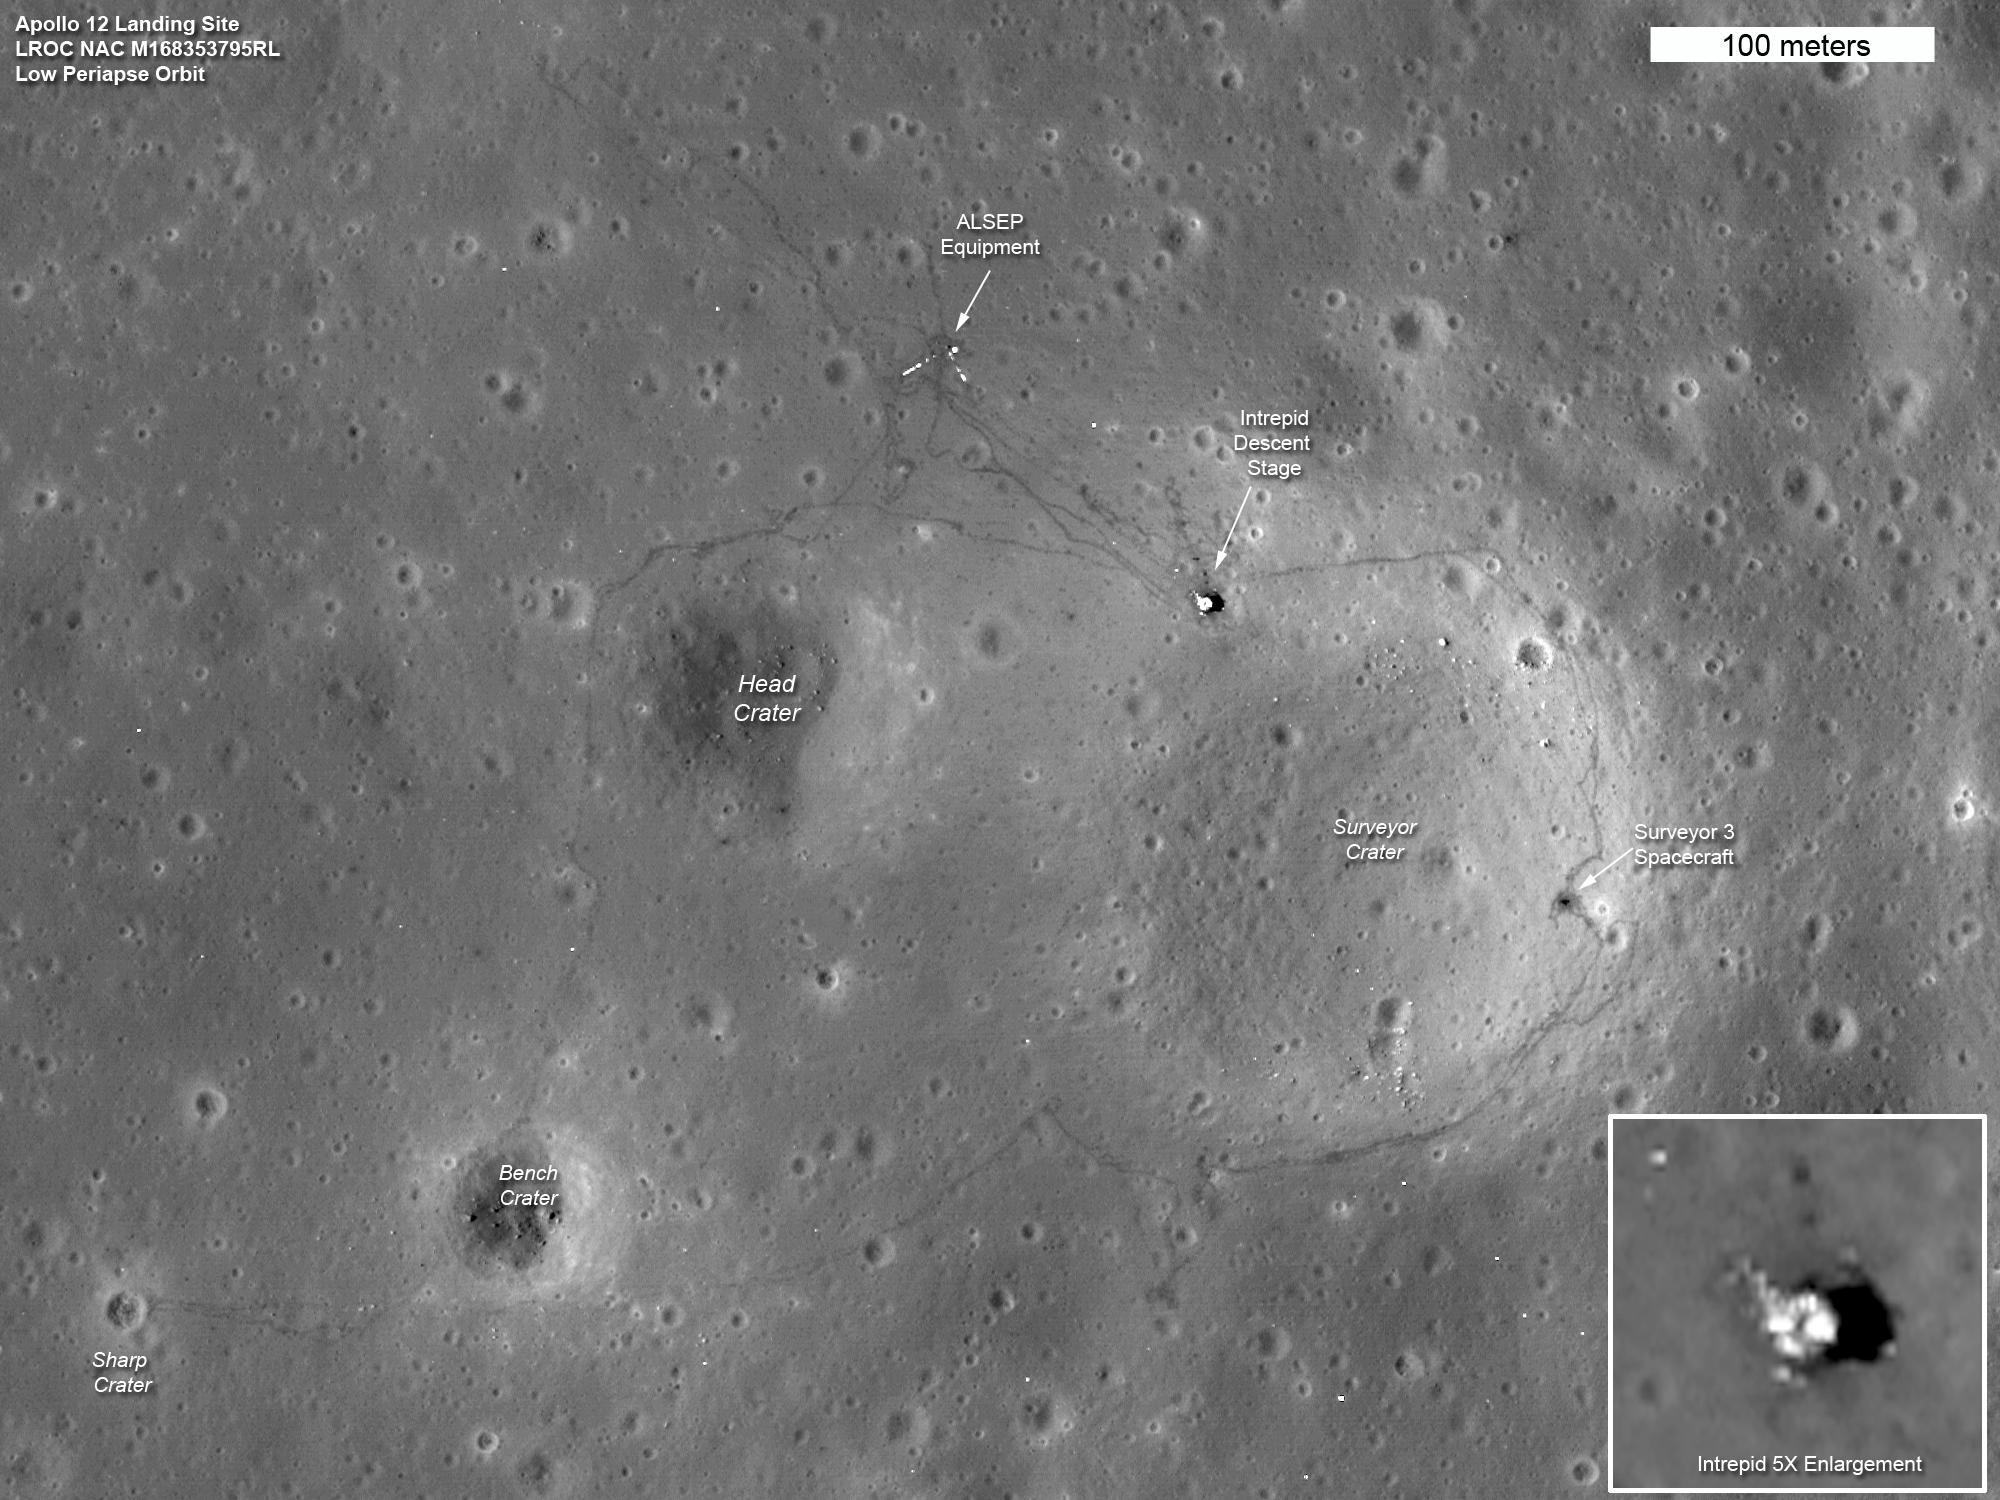 2011 Lunar Reconnaissance Orbiter photograph of the Apollo 12 landing site including the astronauts' tracks from two moonwalks